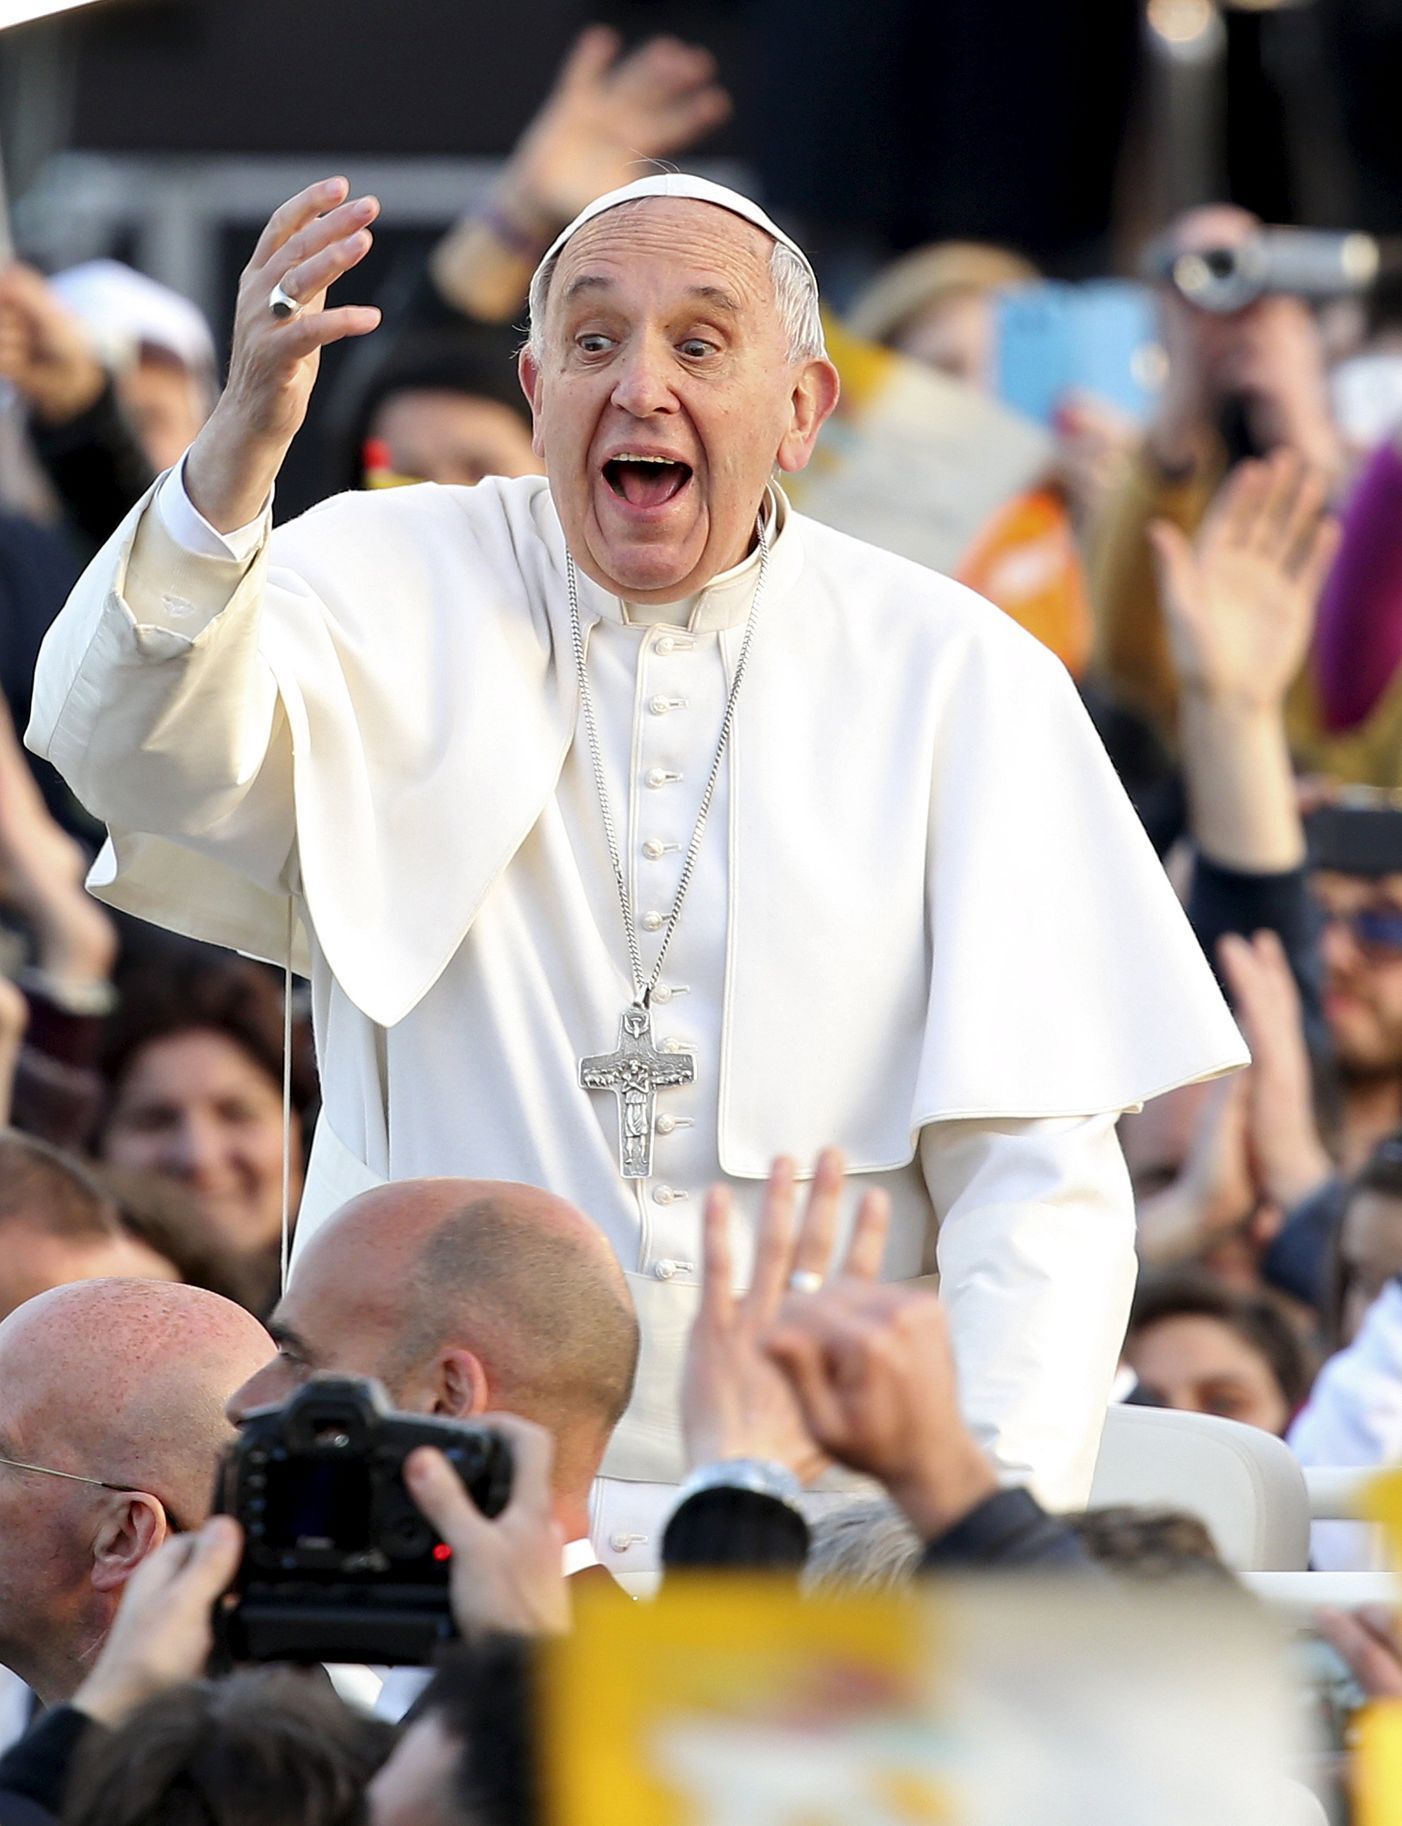 Pope Francis waves as he leaves at the end of meeting with youths at the seafront during his pastoral visit in Naples